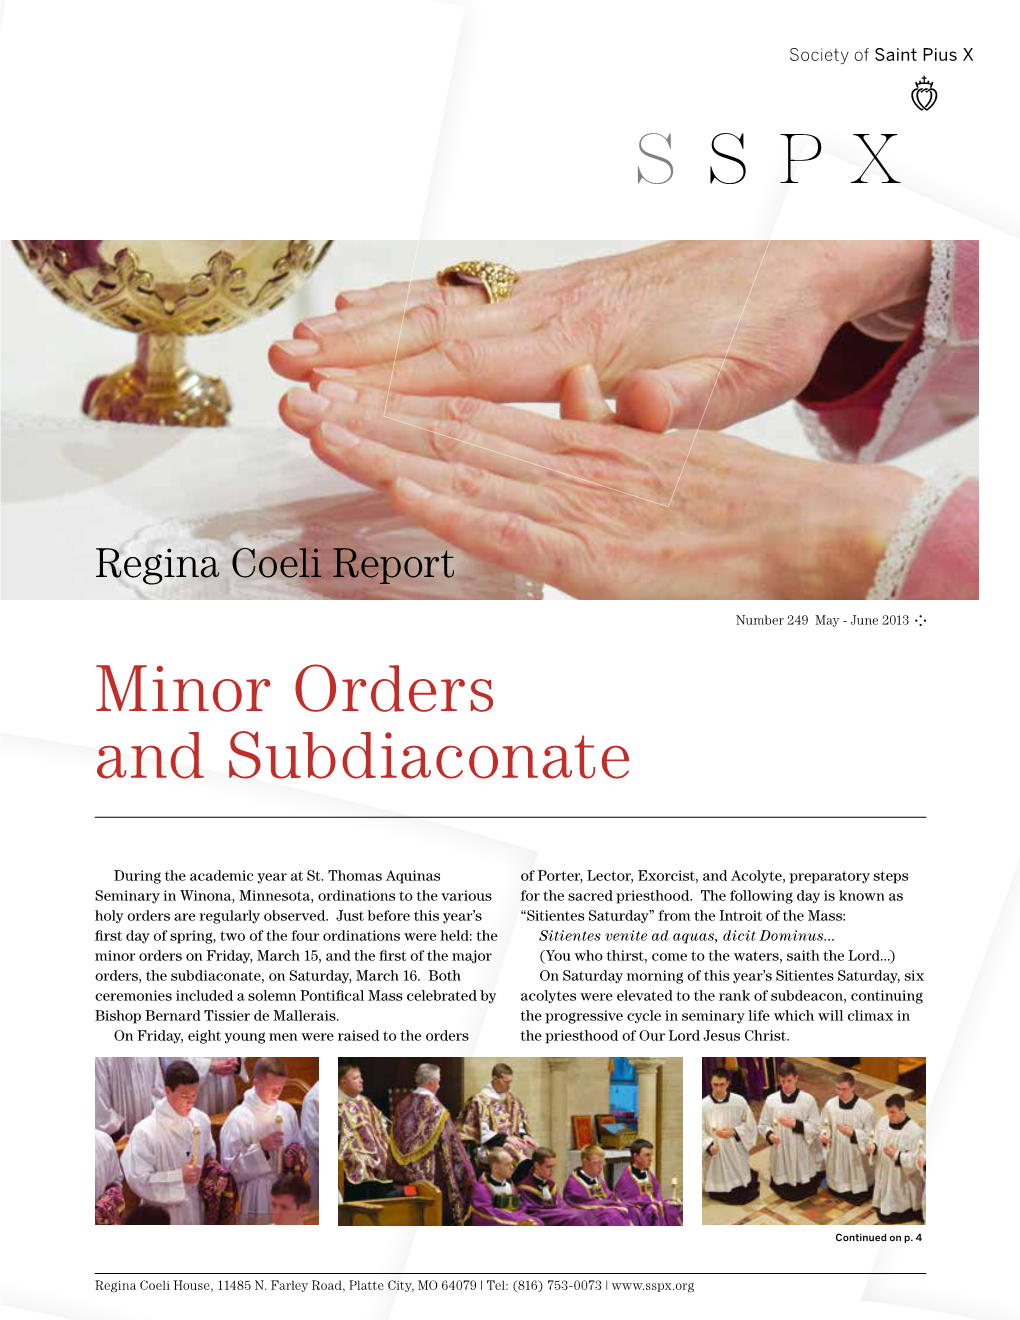 Minor Orders and Subdiaconate